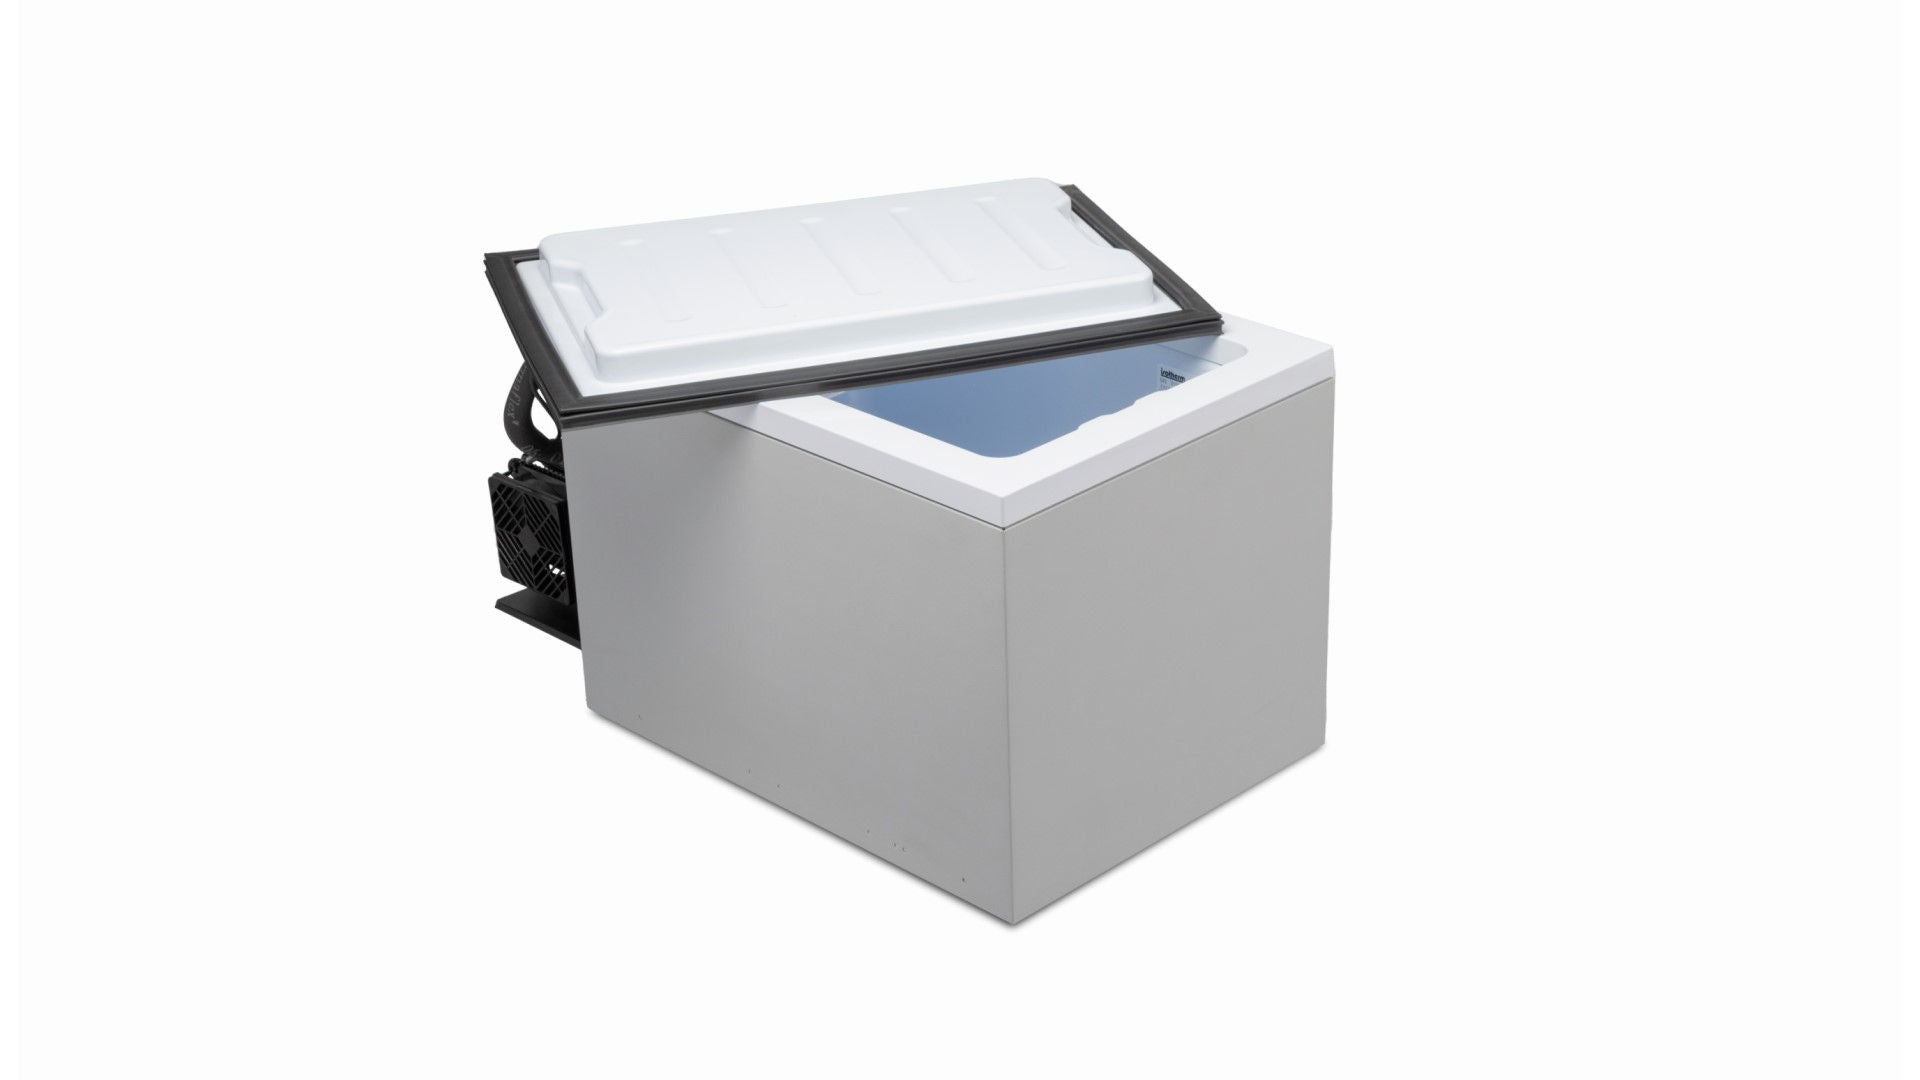 Product picture of BI 29 cooling box with custom panel option semi-open